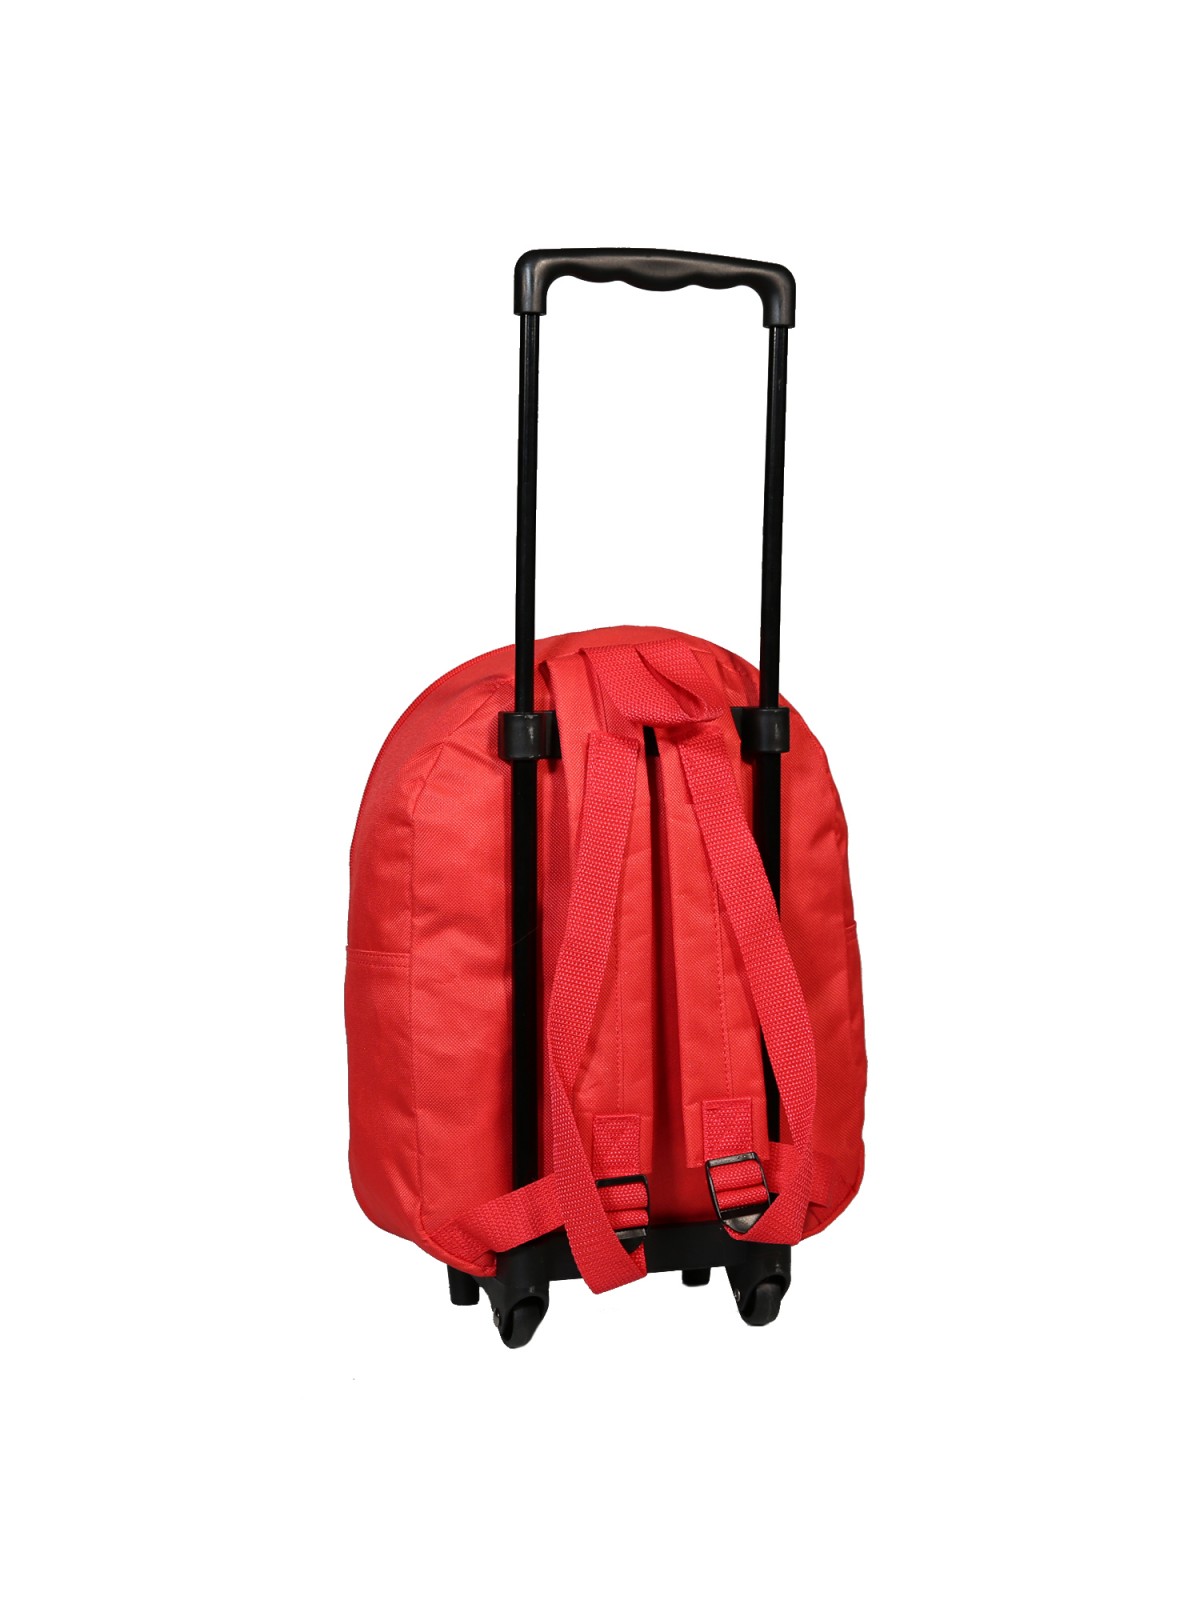 Cars Schoolbag with wheels